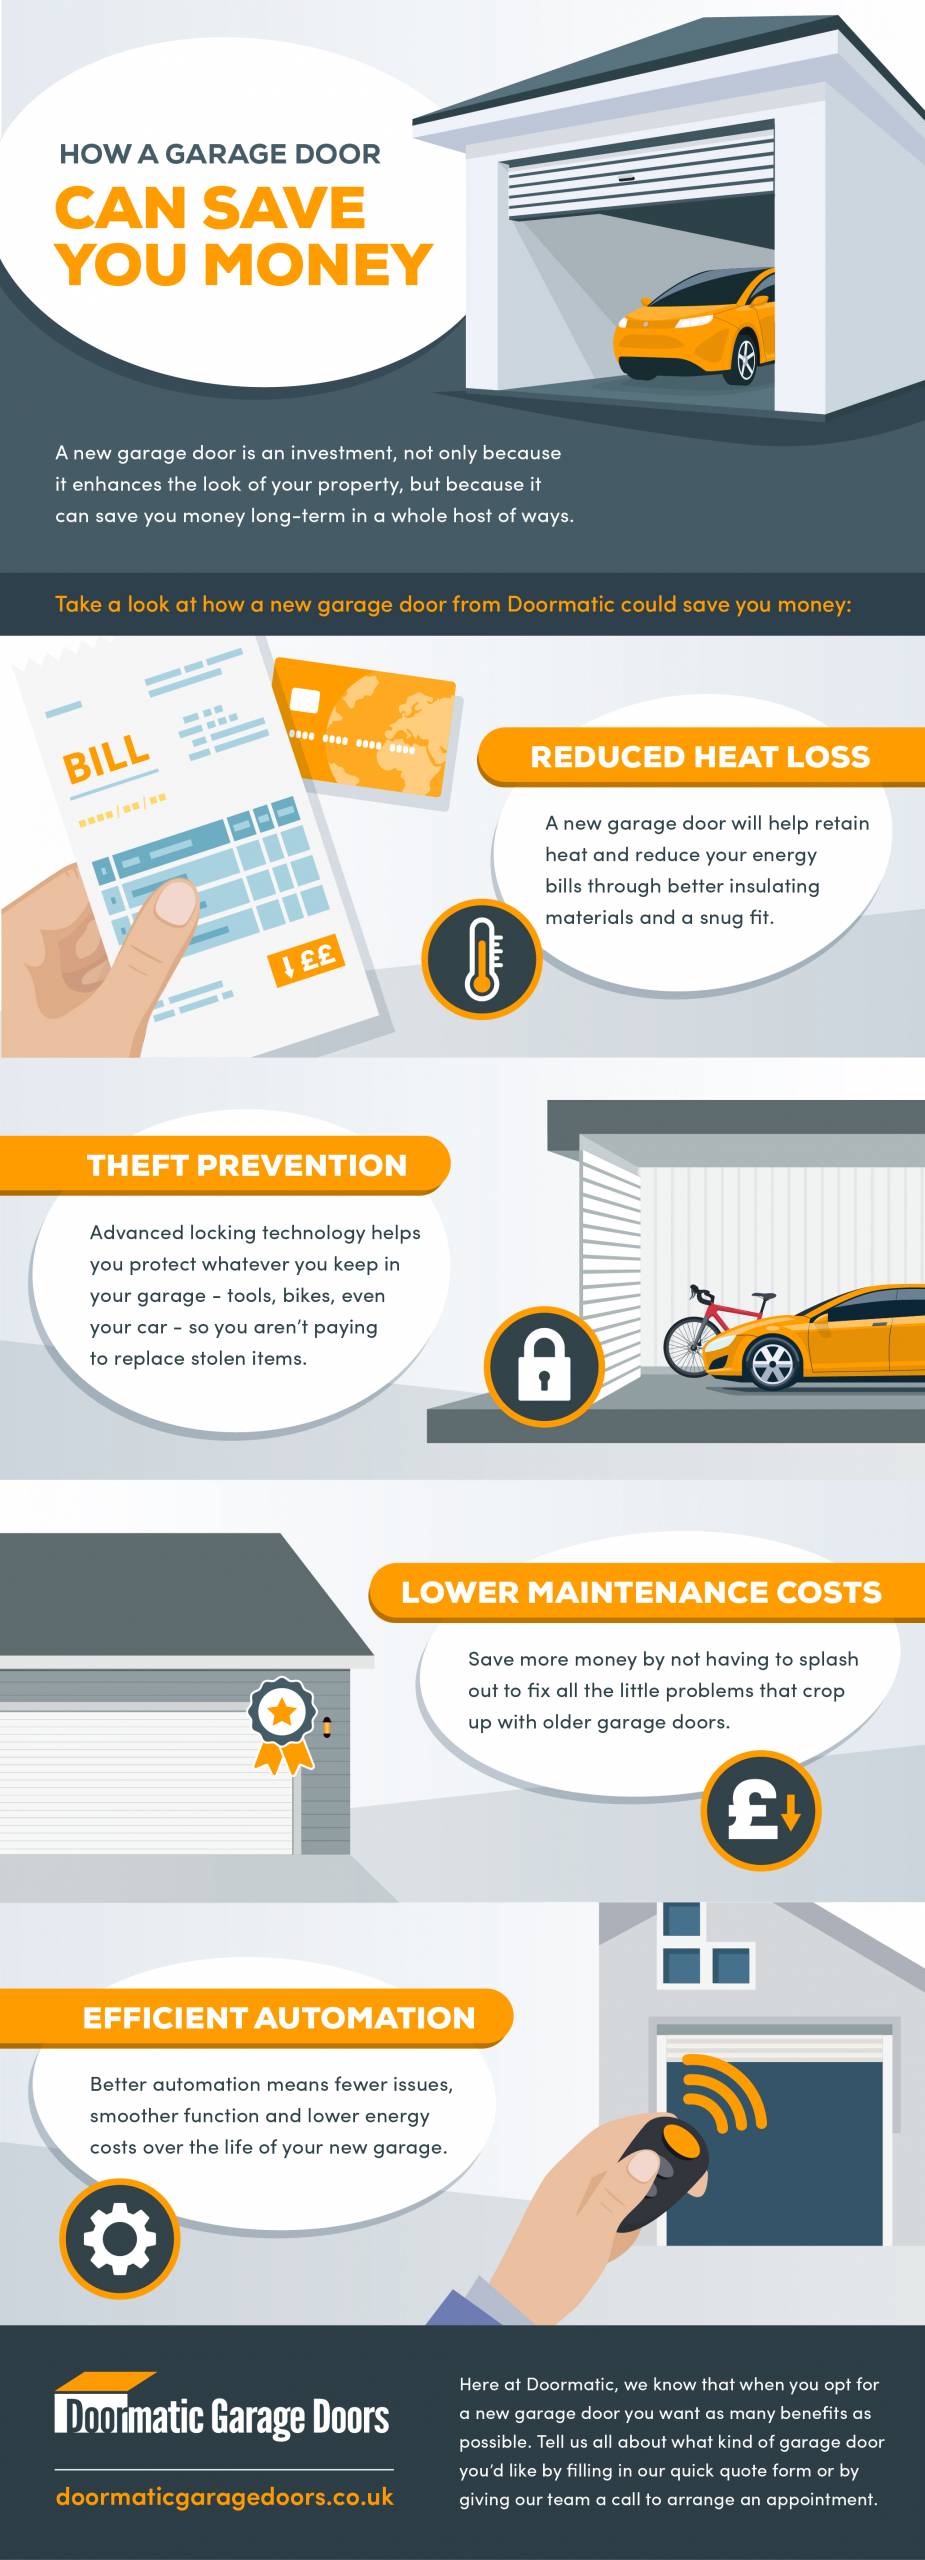 How a garage door can save you money